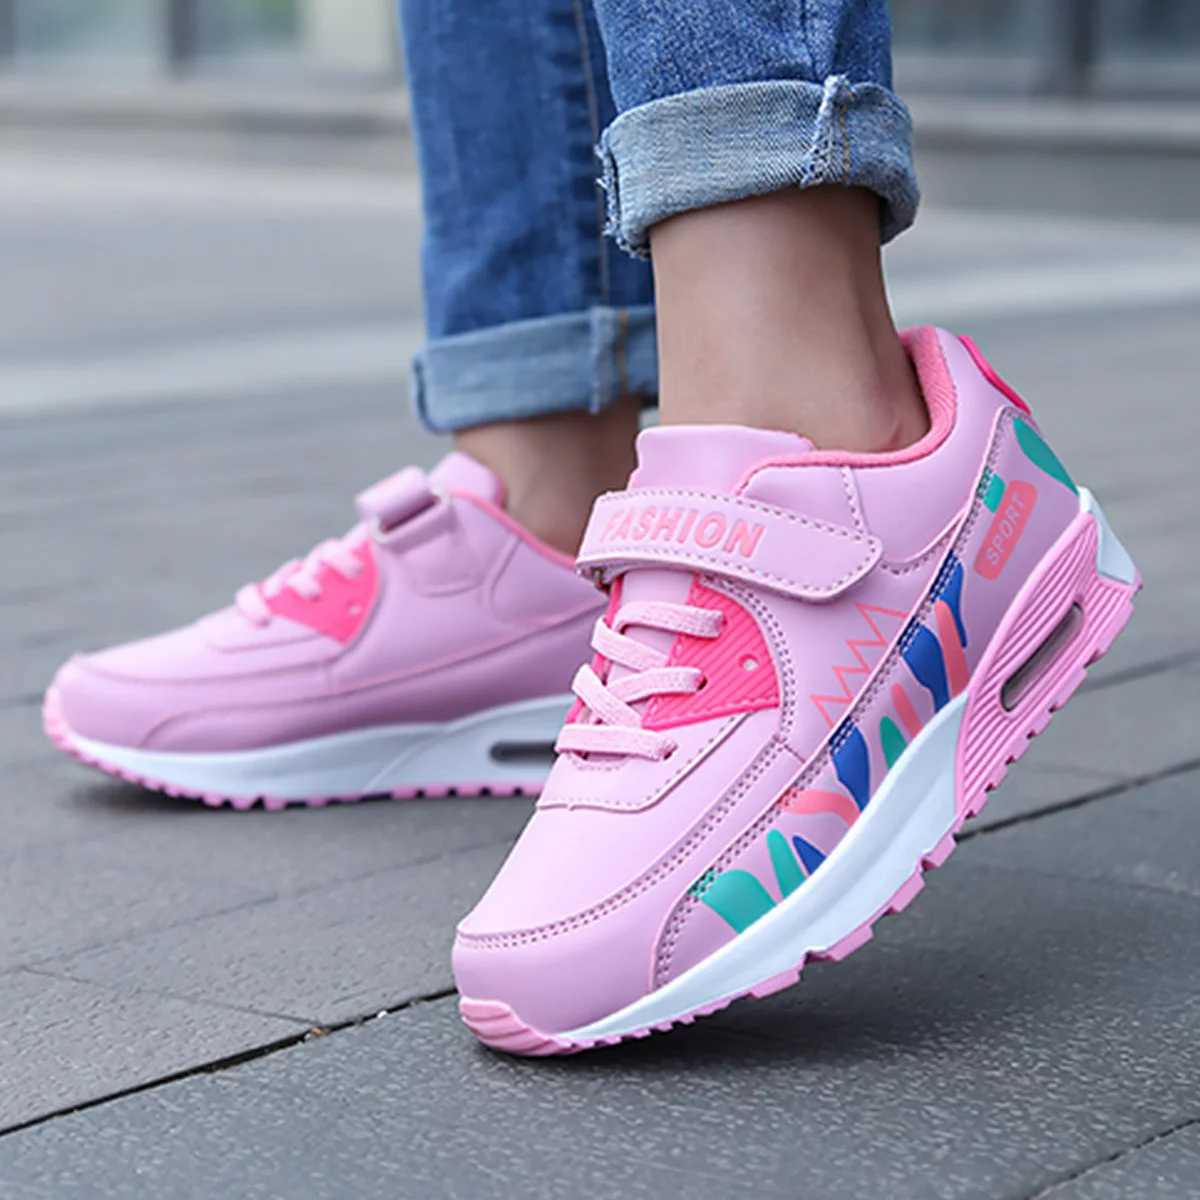 Fashion-Children-Sneakers-Girls-Shoes-Breathable-Comfort-Sports-Shoes-Kids-Running-Casual-Tennis-Girls-Sneakers-7-2